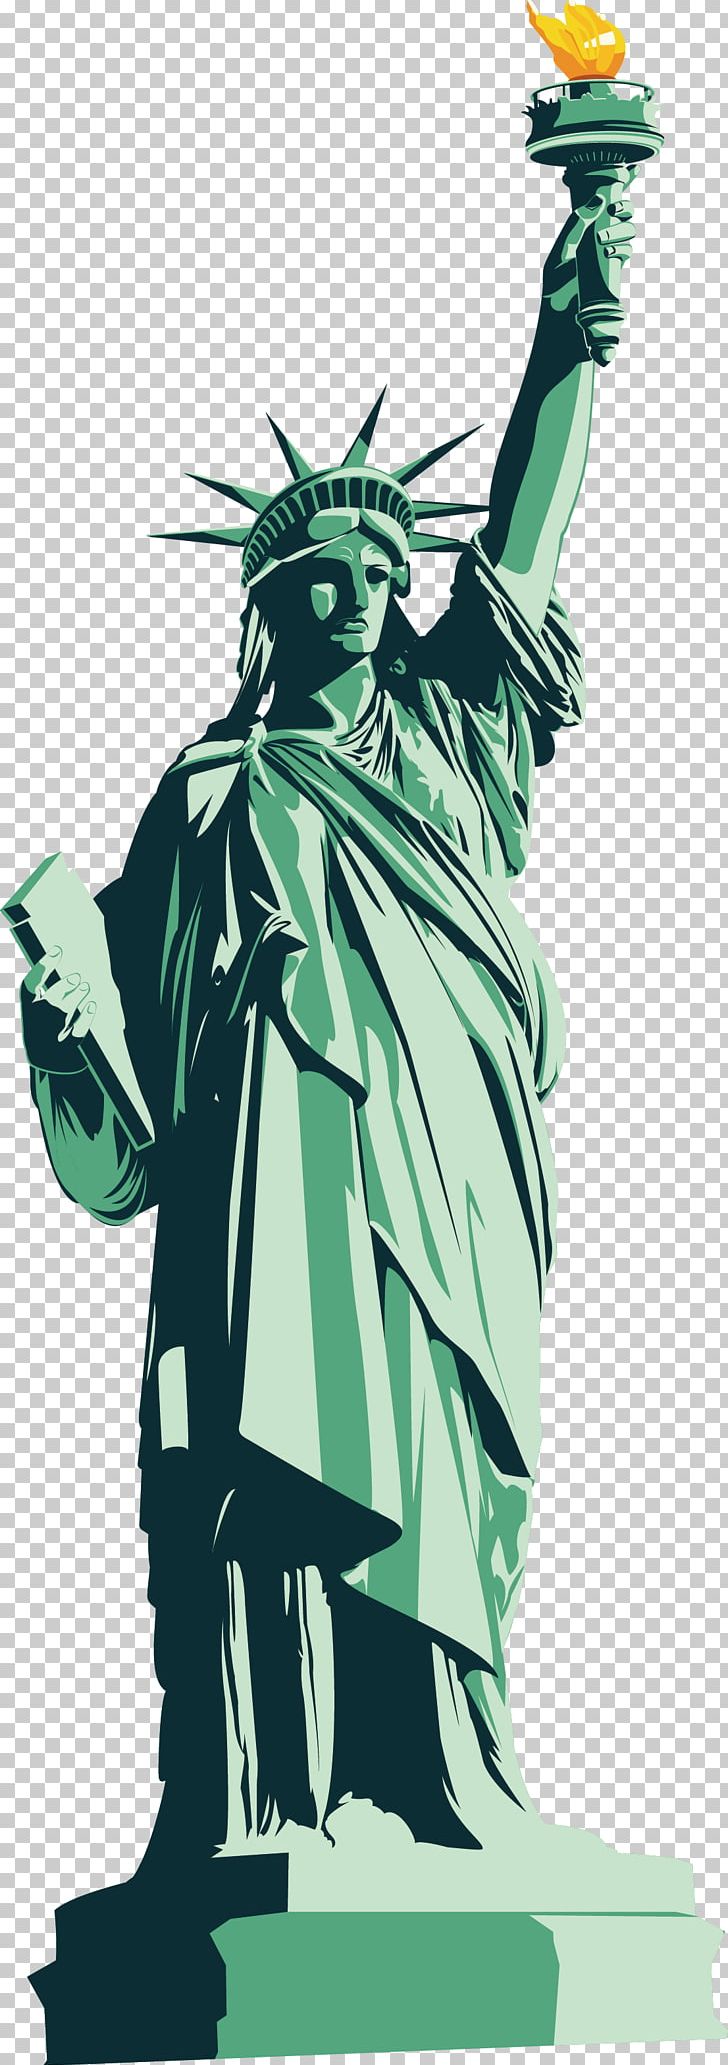 Statue Of Liberty Tourist Attraction PNG, Clipart, Architecture, Art, Buddha Statue, Cartoon, Color Free PNG Download